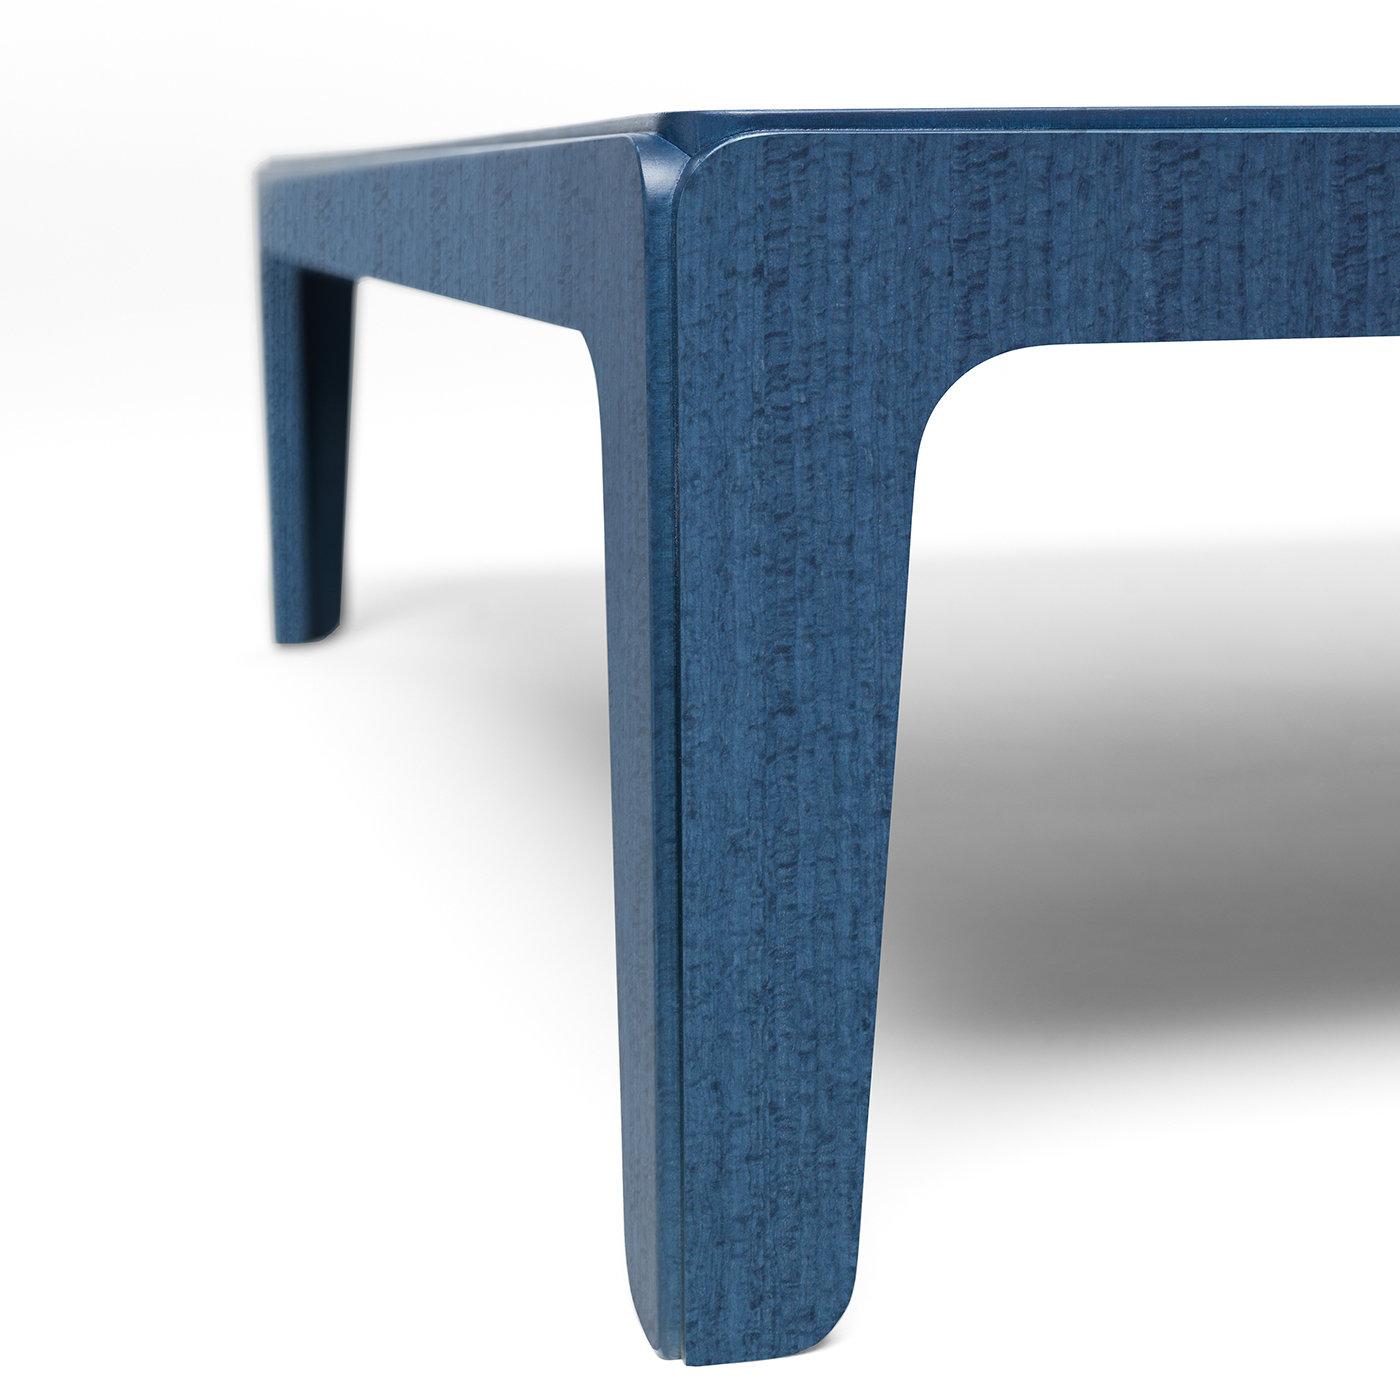 Reinterpreting the look of stately, antique tables with a contemporary flair, this low coffee table is made of MDF with a stunning blue stained eucalyptus veneer. The solid-block, sculptural appearance is in fact the result of a skilled assembly of